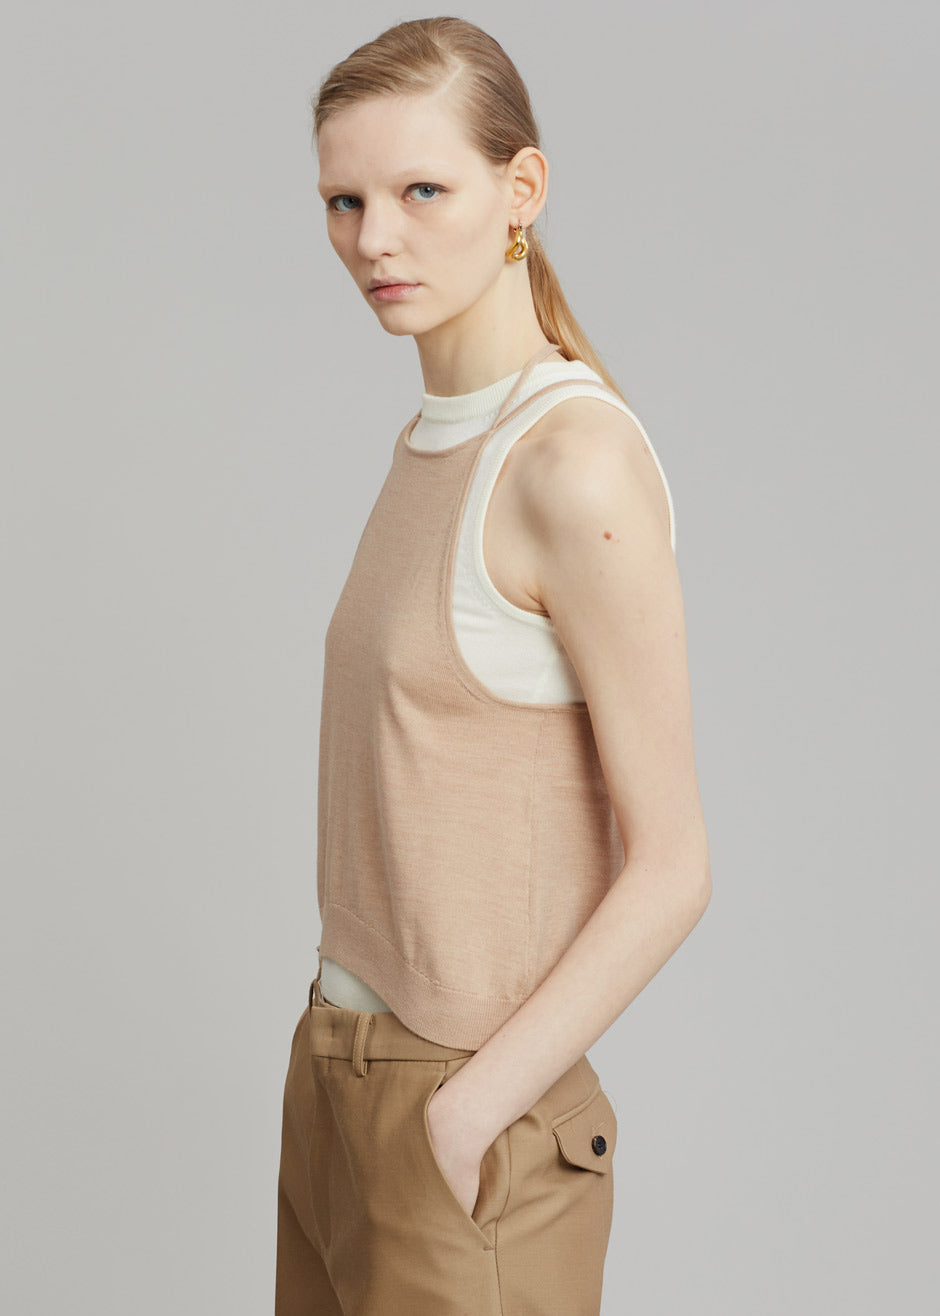 JW Anderson Layered Tank Top - White/Beige